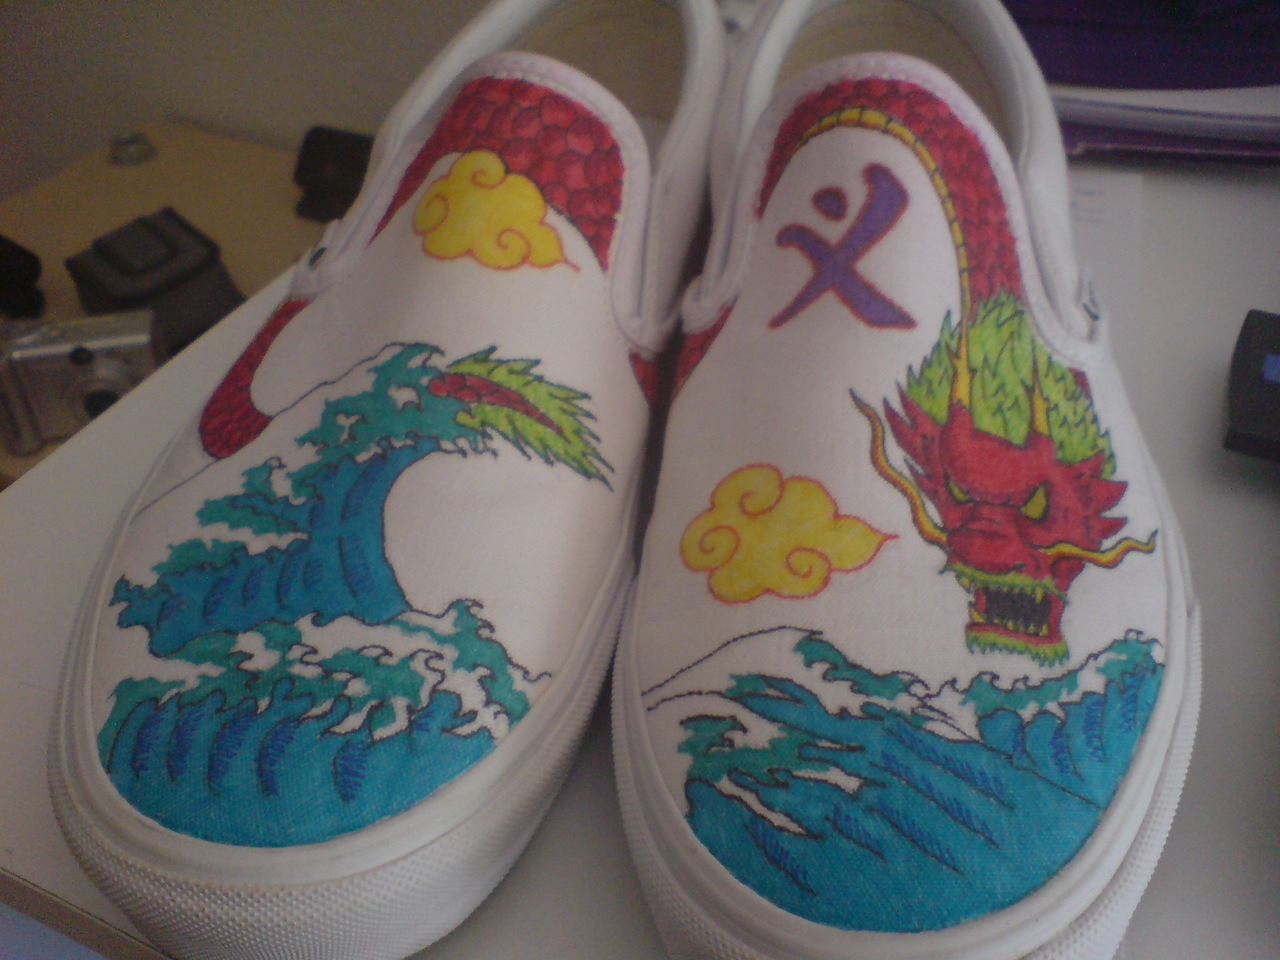 My VANs that I drew on. I wear em’ everyday now, so they don’t look this good anymore :P I’m adding new things everyday at http://gallegomyego.tumblr.com/